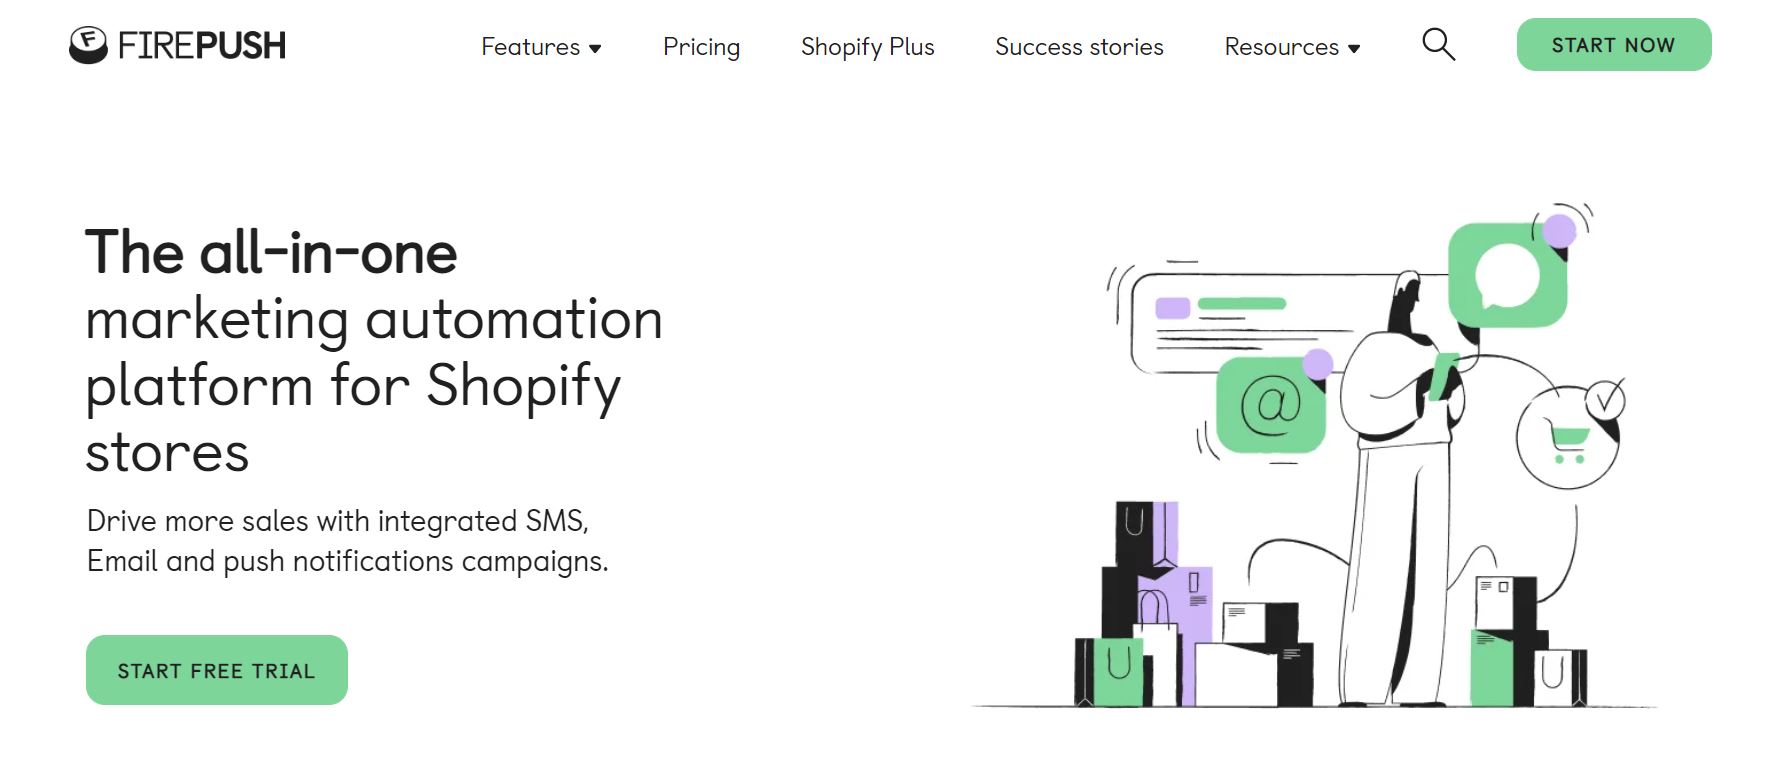 Firepush For Shopify Store - Web Push, Email, and SMS Marketing